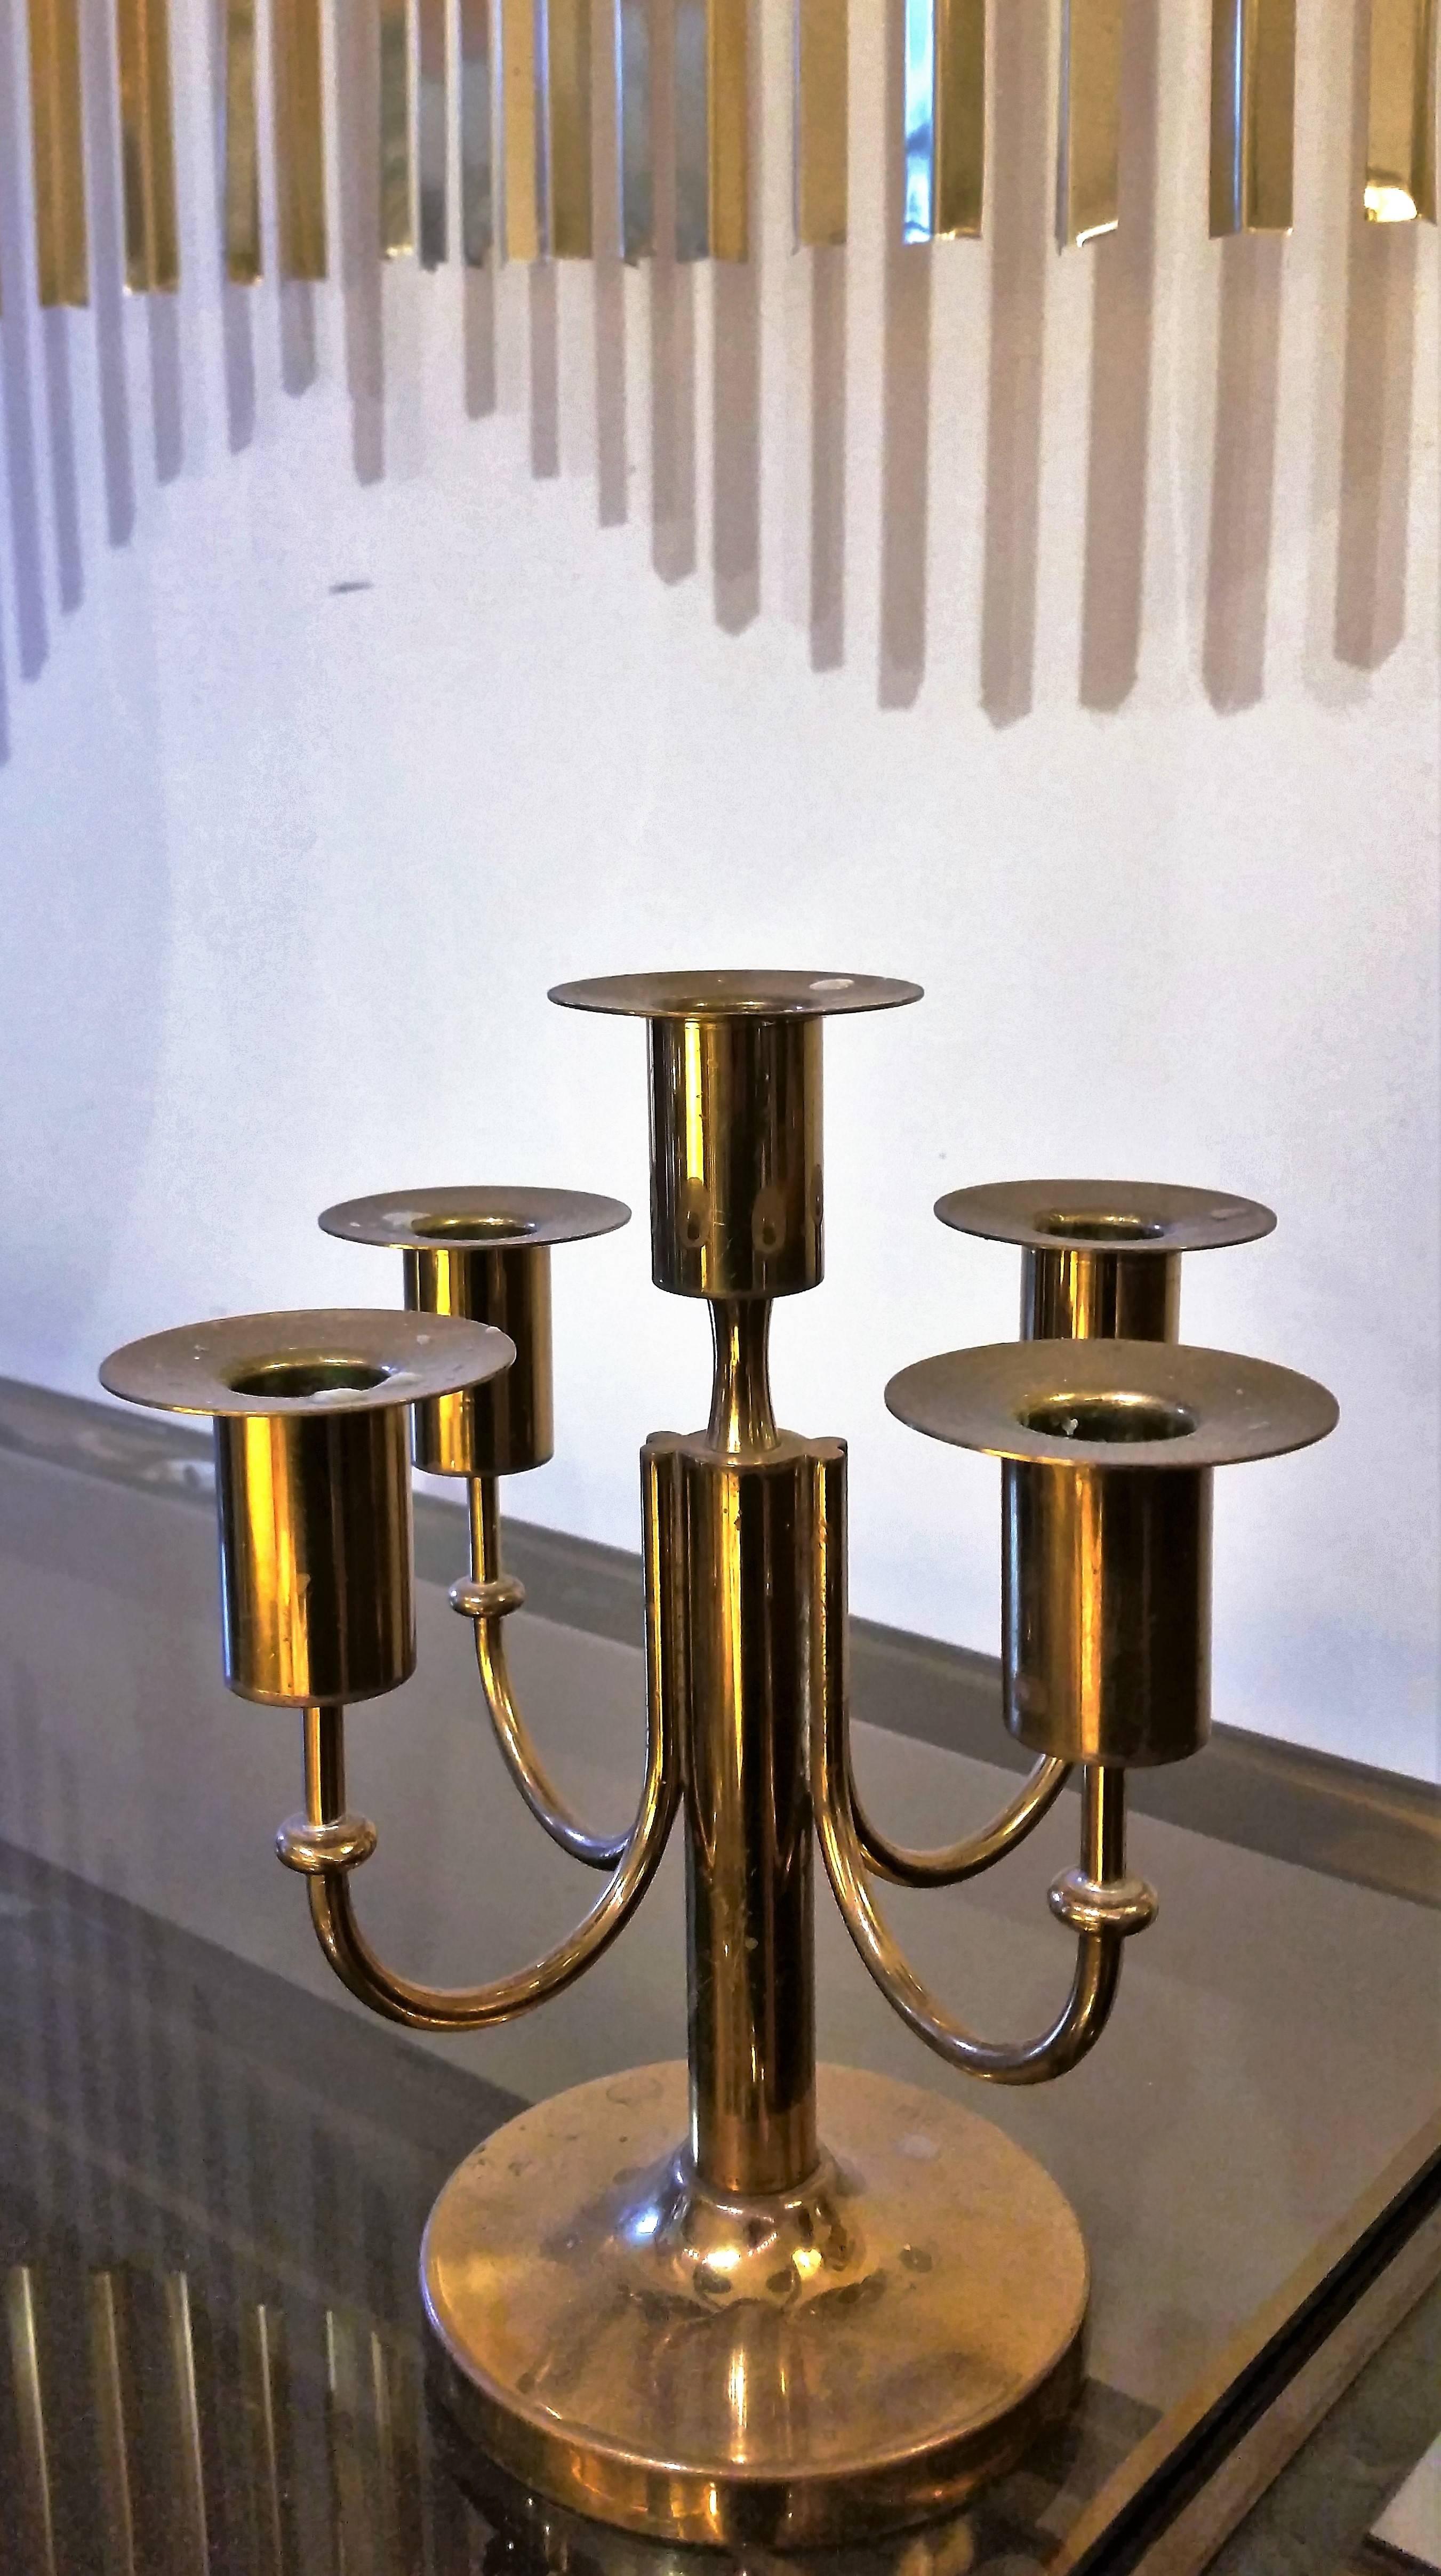 A four-arm candleholder by Tommi Parzinger.